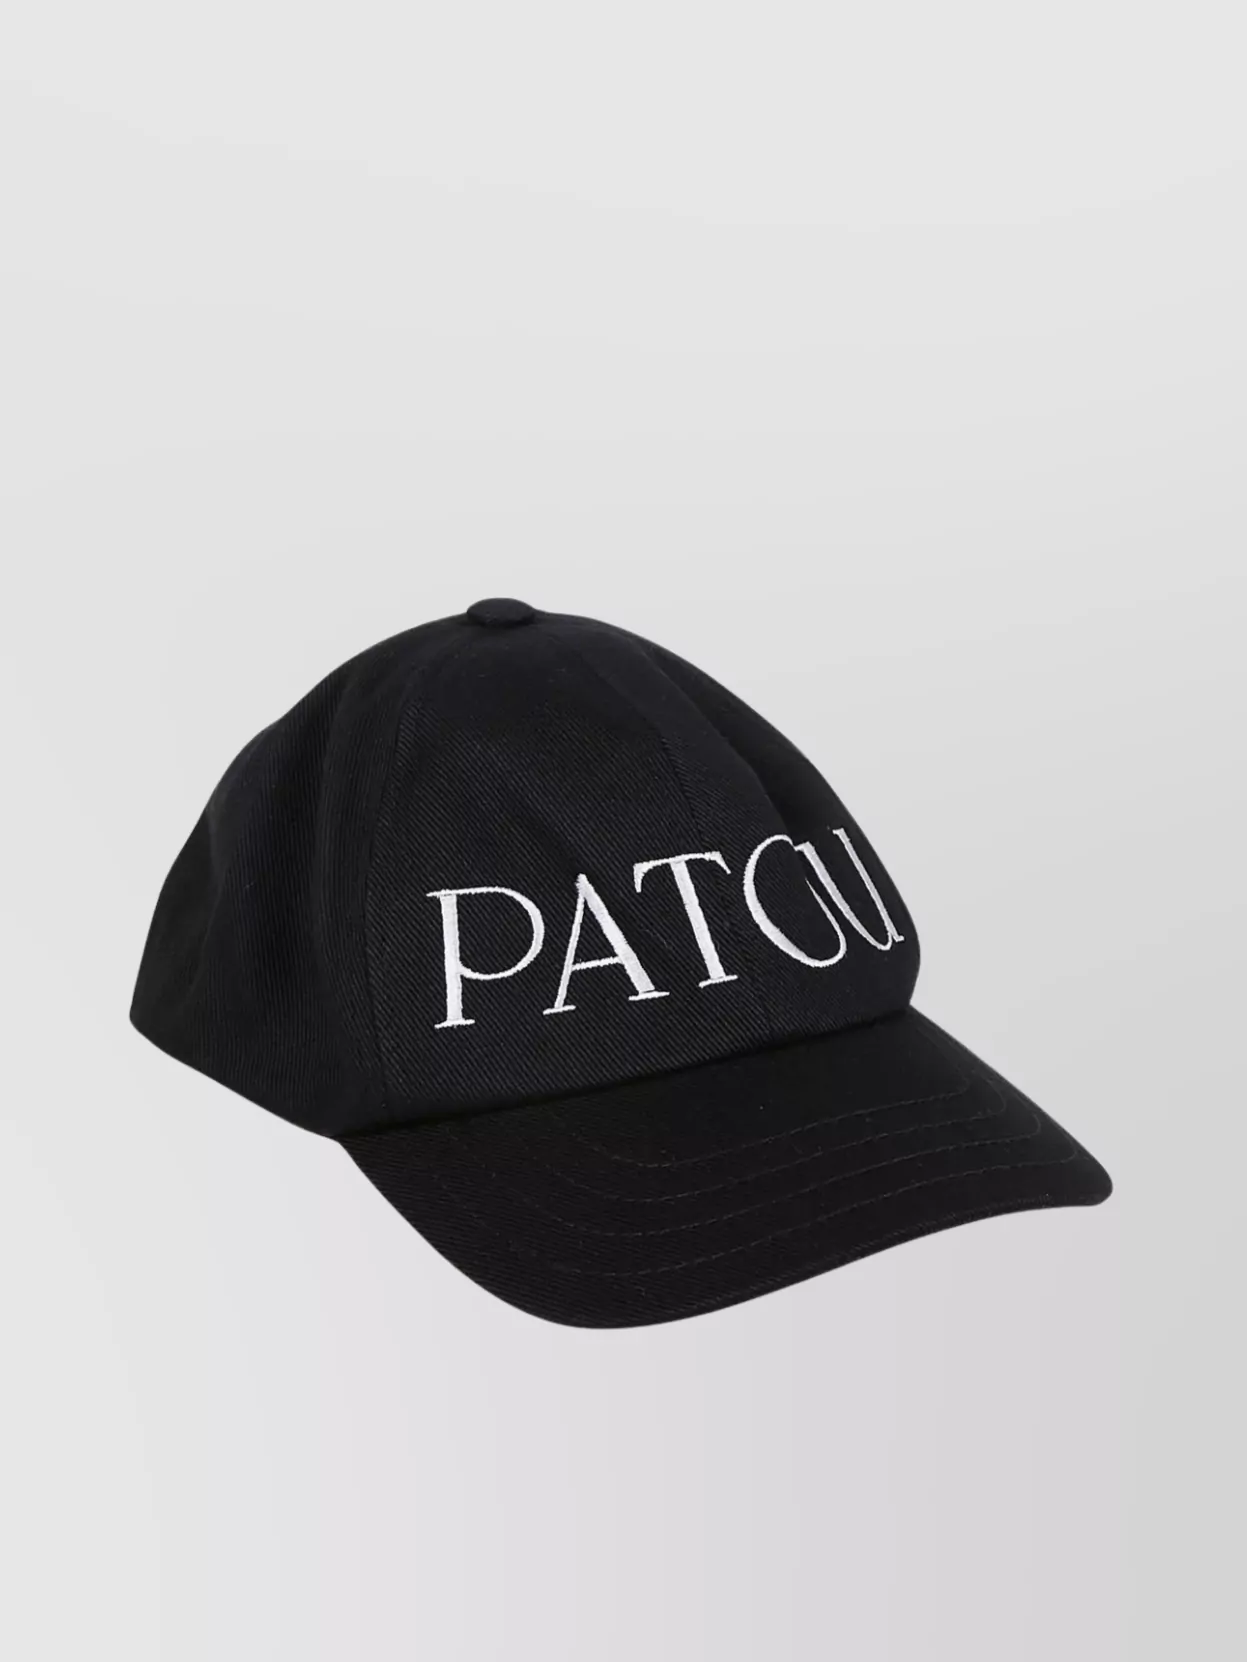 Shop Patou Modern Cap For All Genders